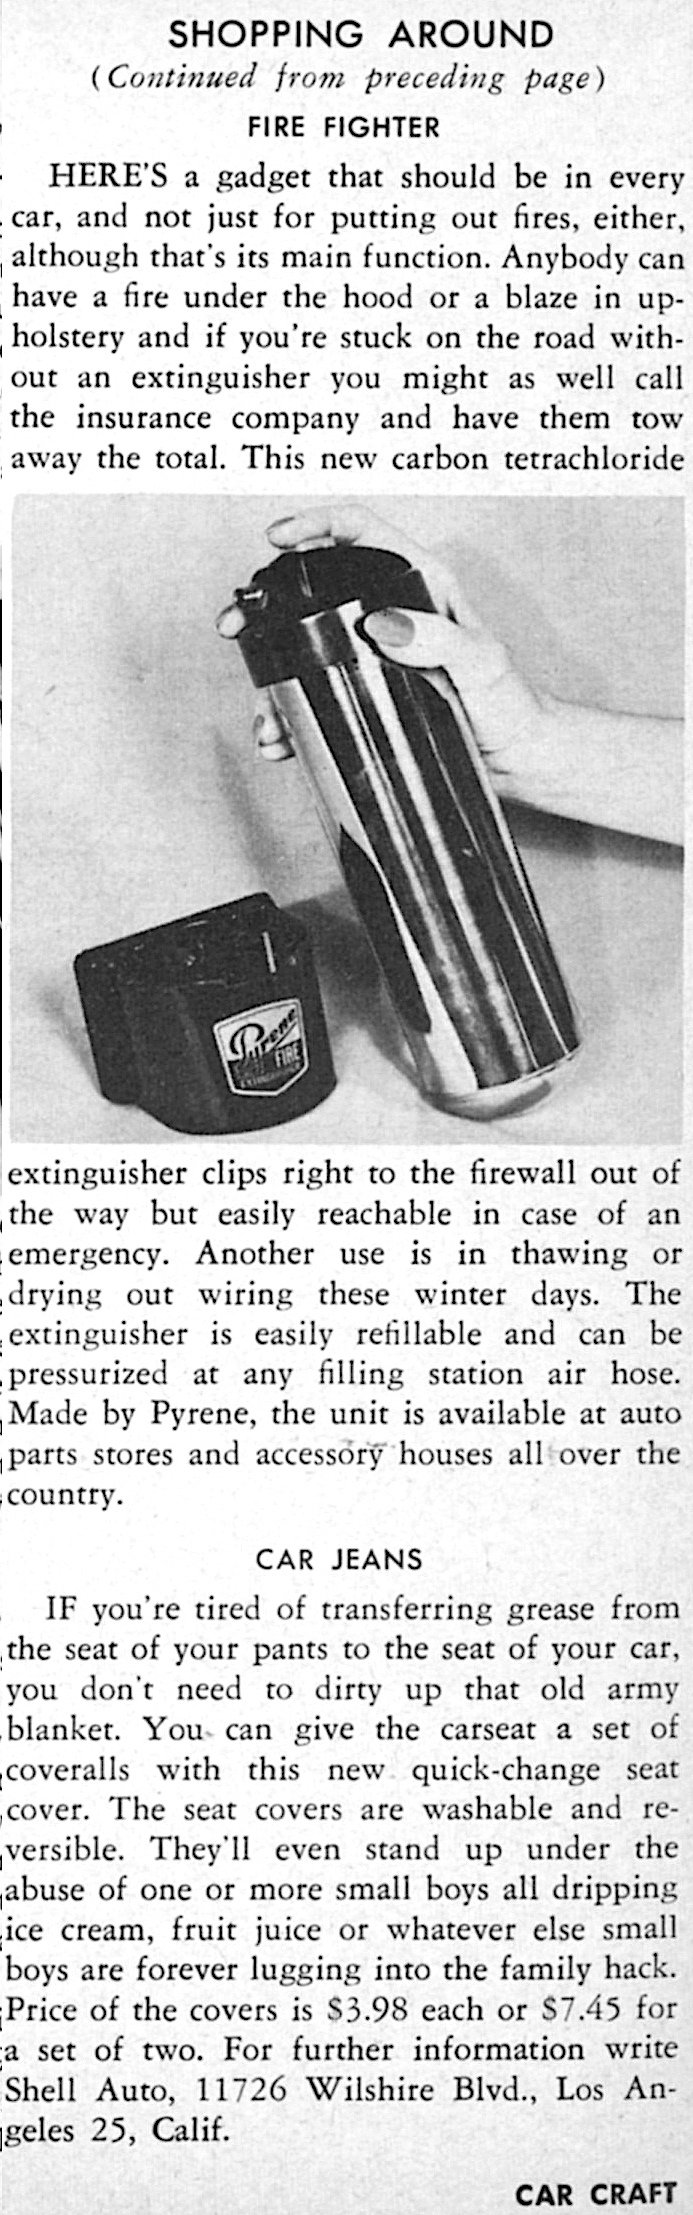 Car Craft - February 1954 - Page 2 32362510